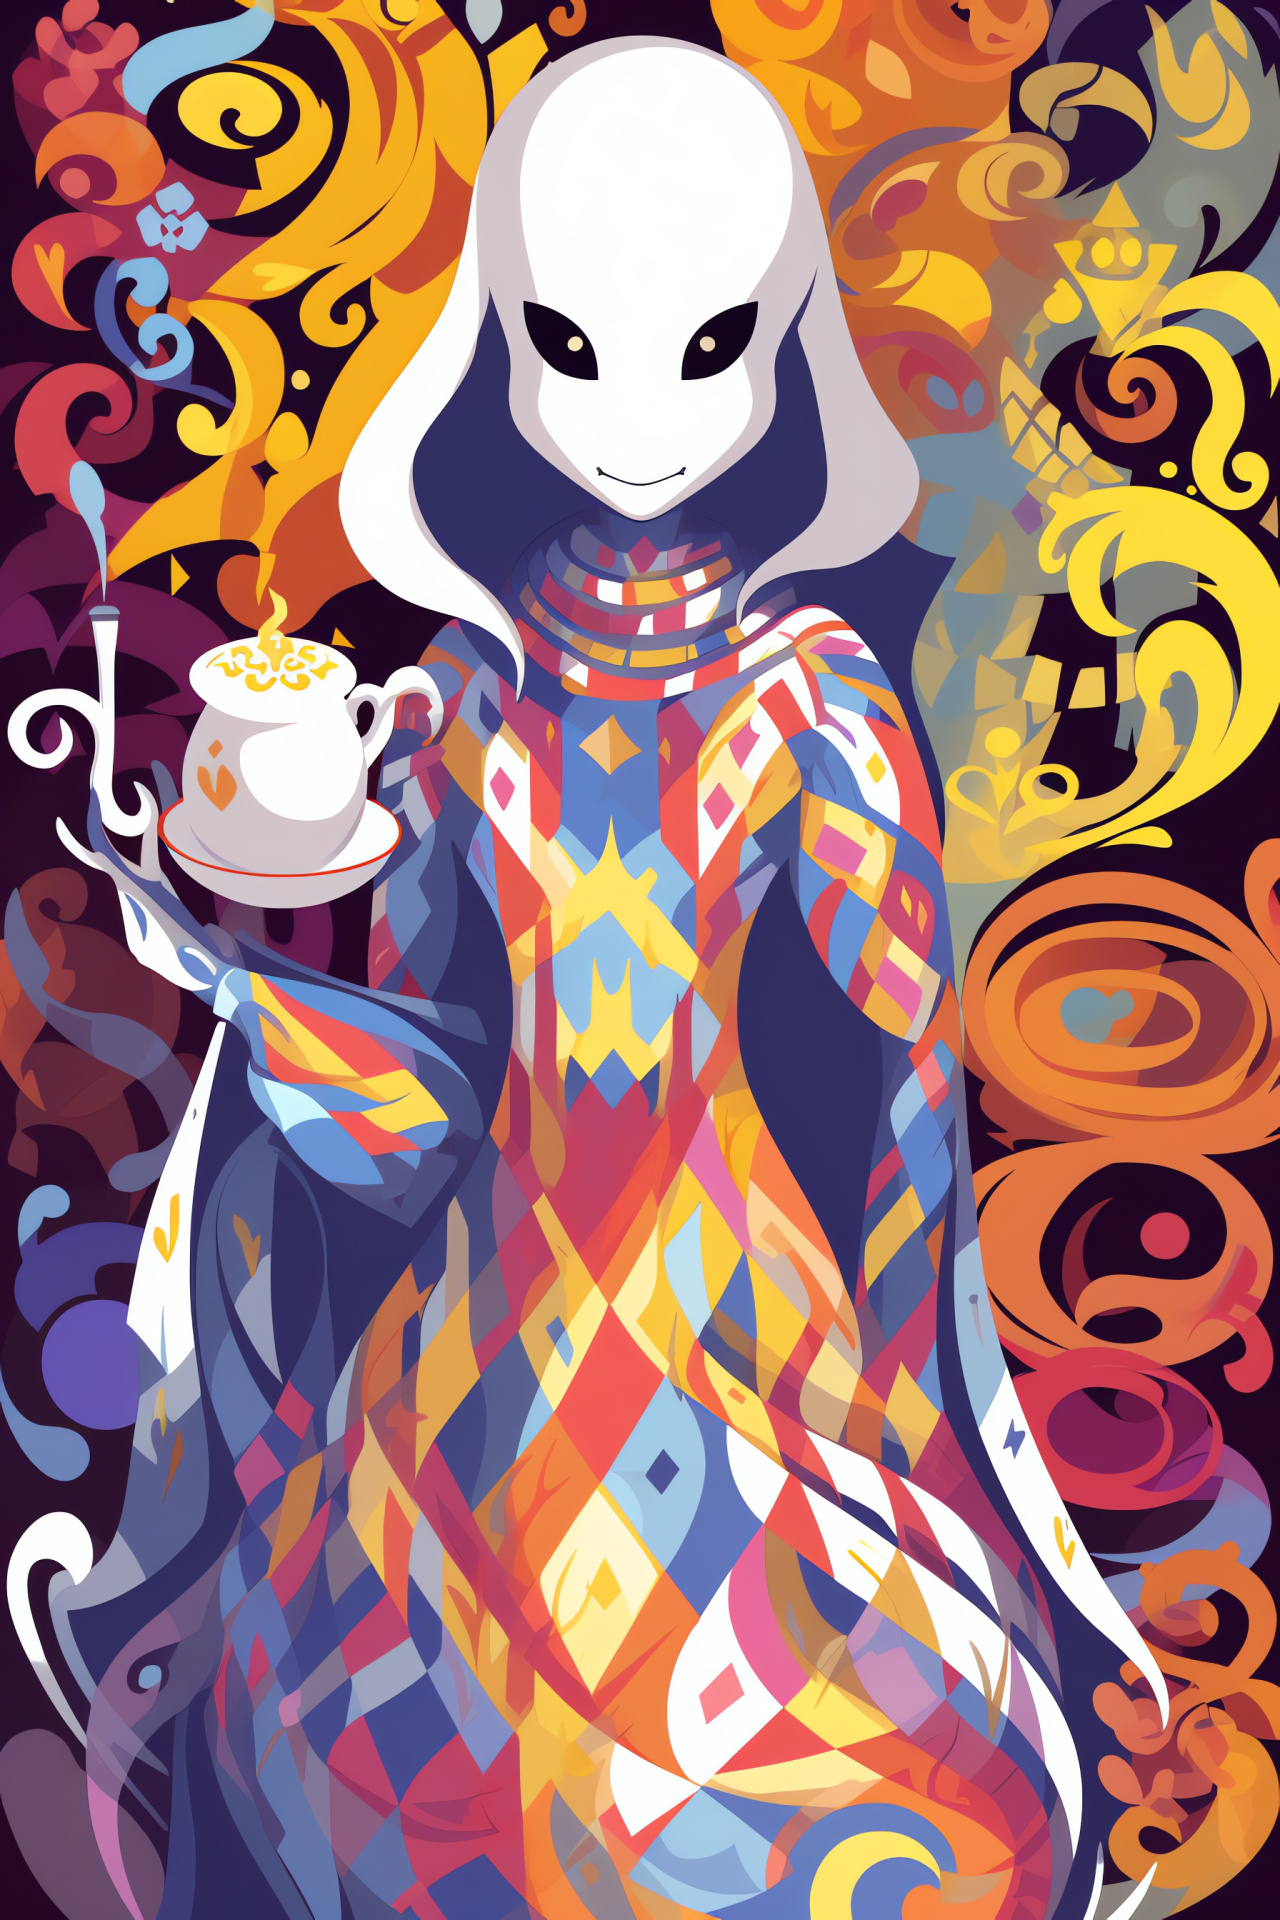 Undertale Toriel artwork, Game character, Metaphysical motif, Polyhedral designs, Contemporary art style, HD Phone Image